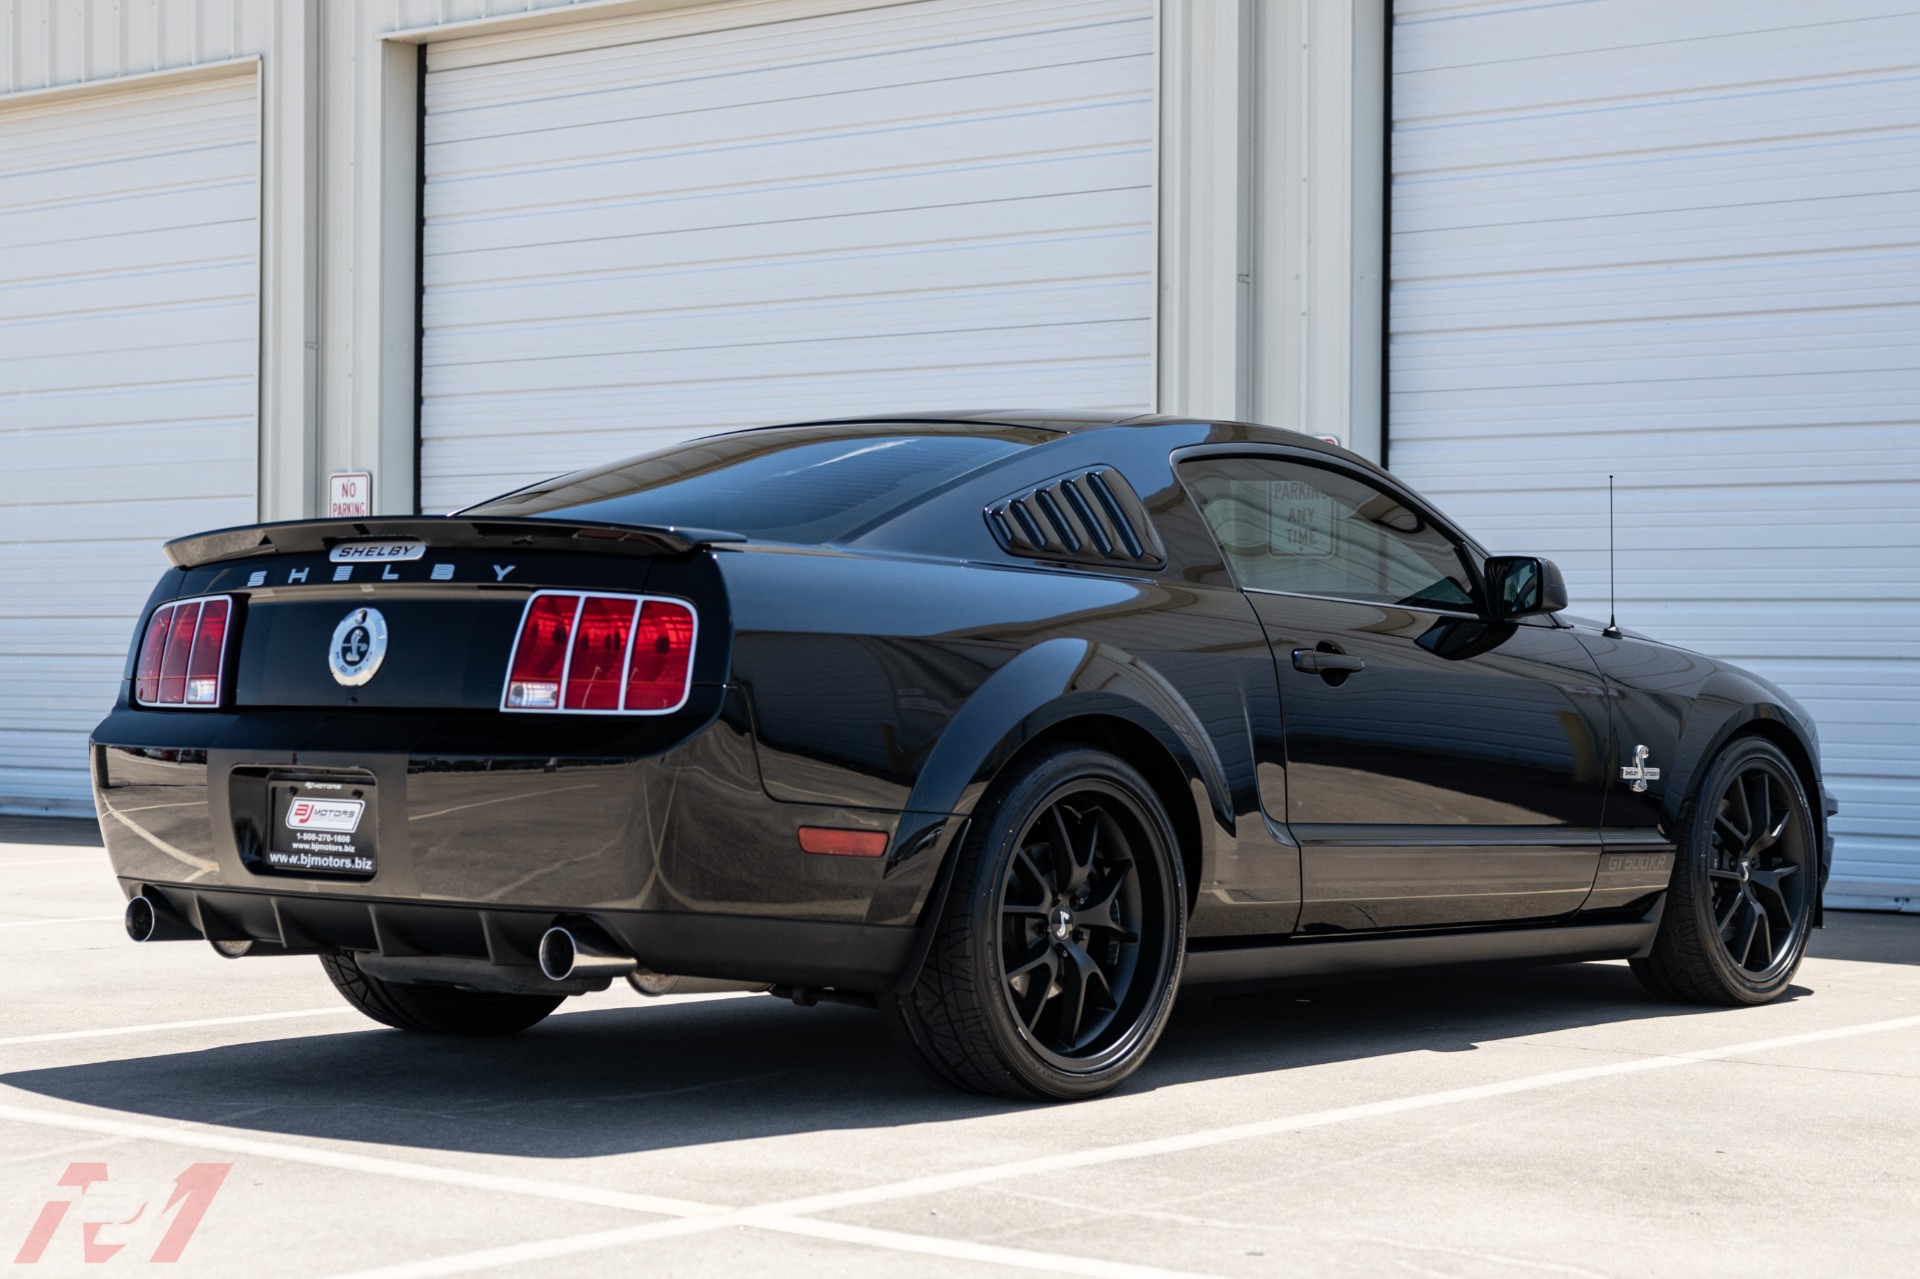 Used-2009-Ford-Mustang-Shelby-GT500KR